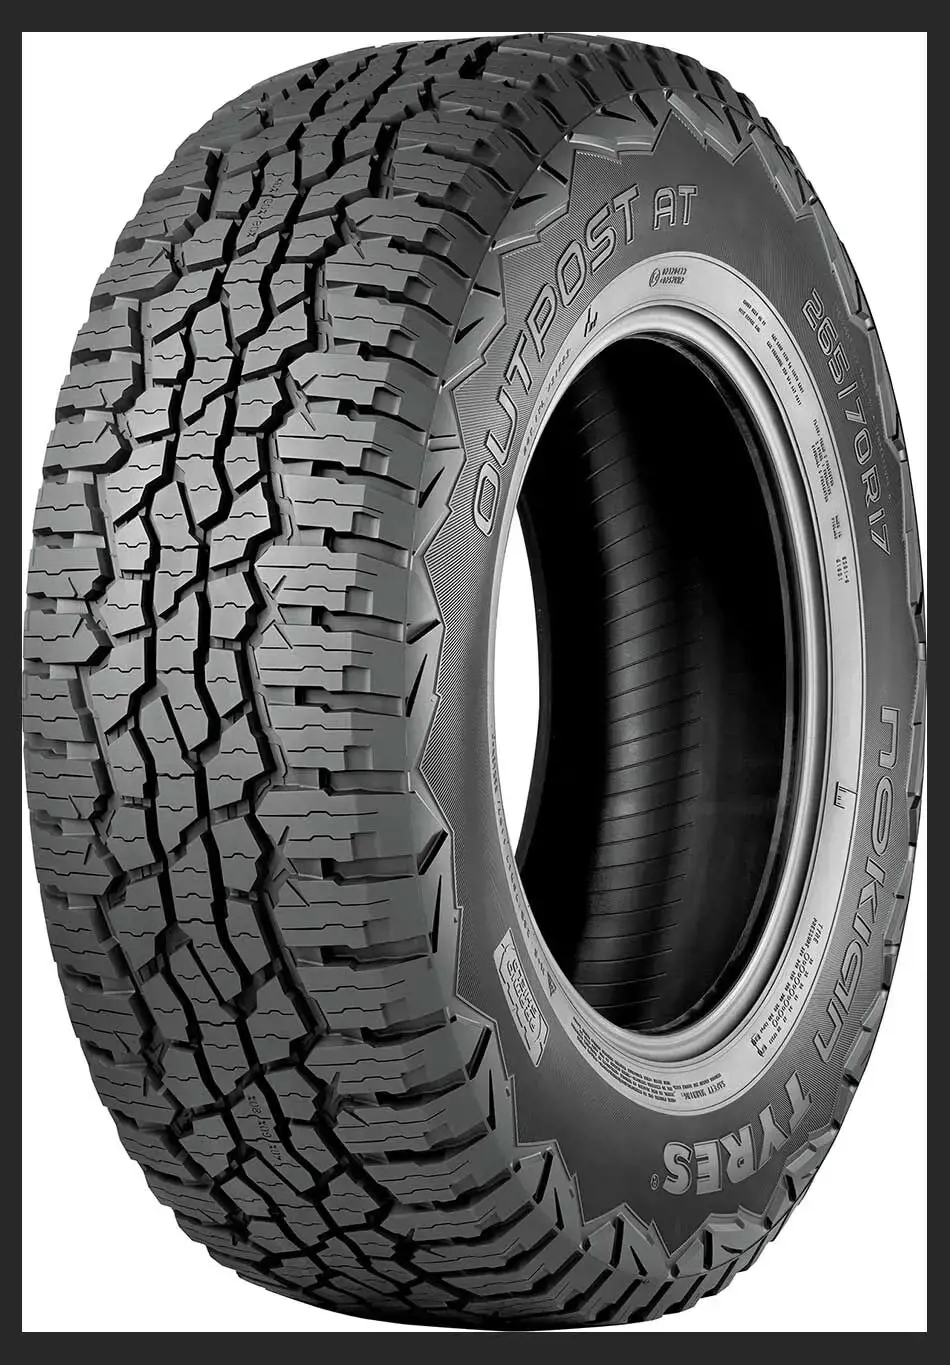 Nokian Tyres Outpost AT 121S/118 R20 265/60